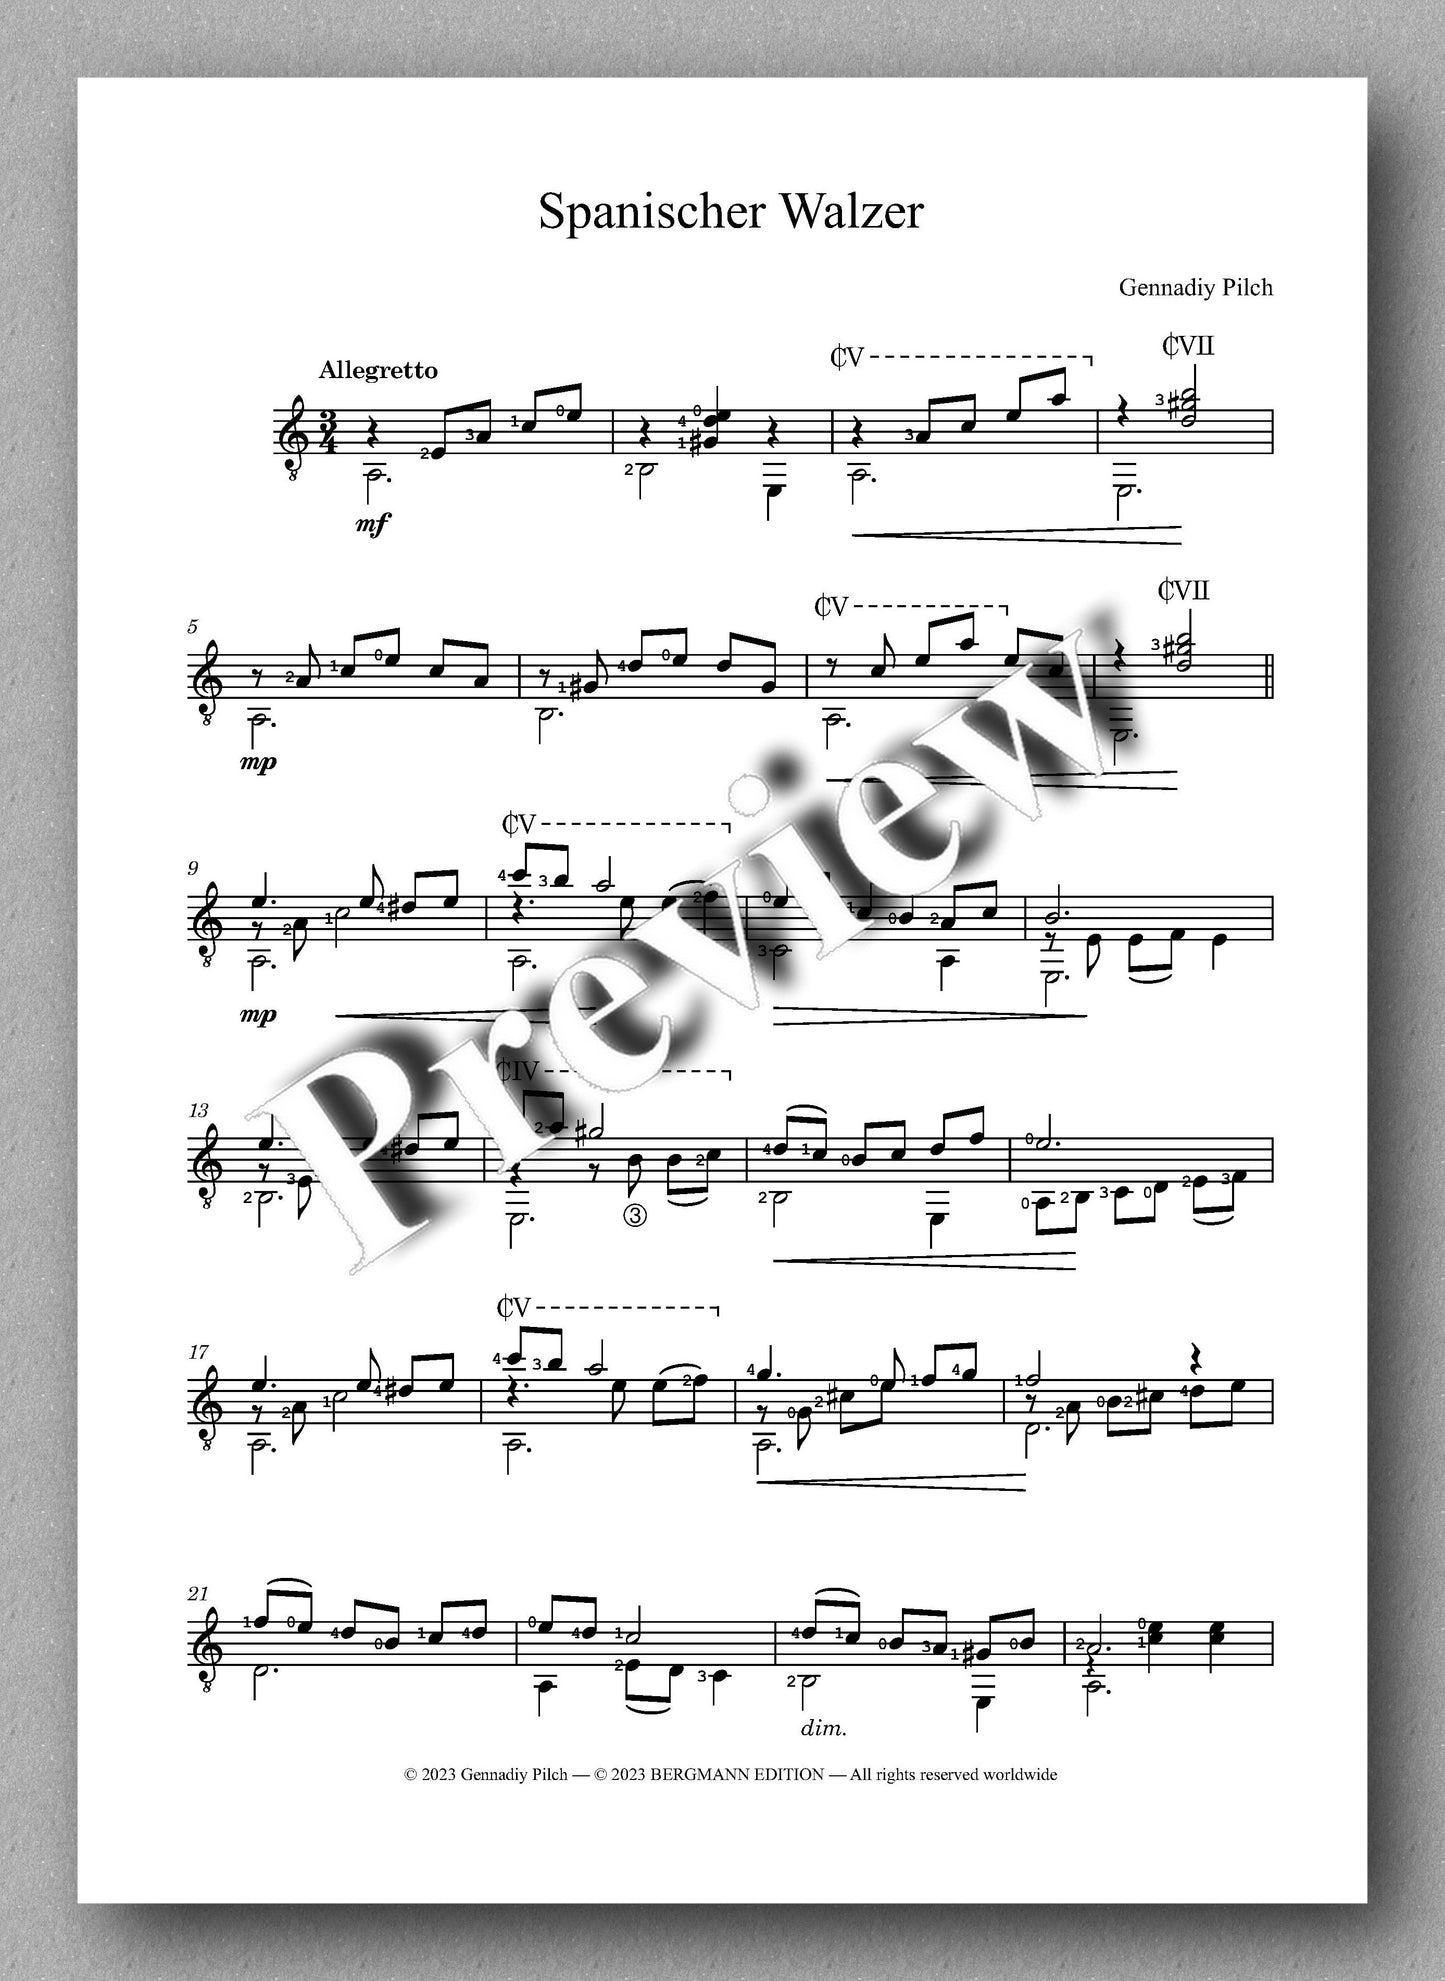 Gennadiy Pilch, Two Spanish Pieces - preview of the  music score 1